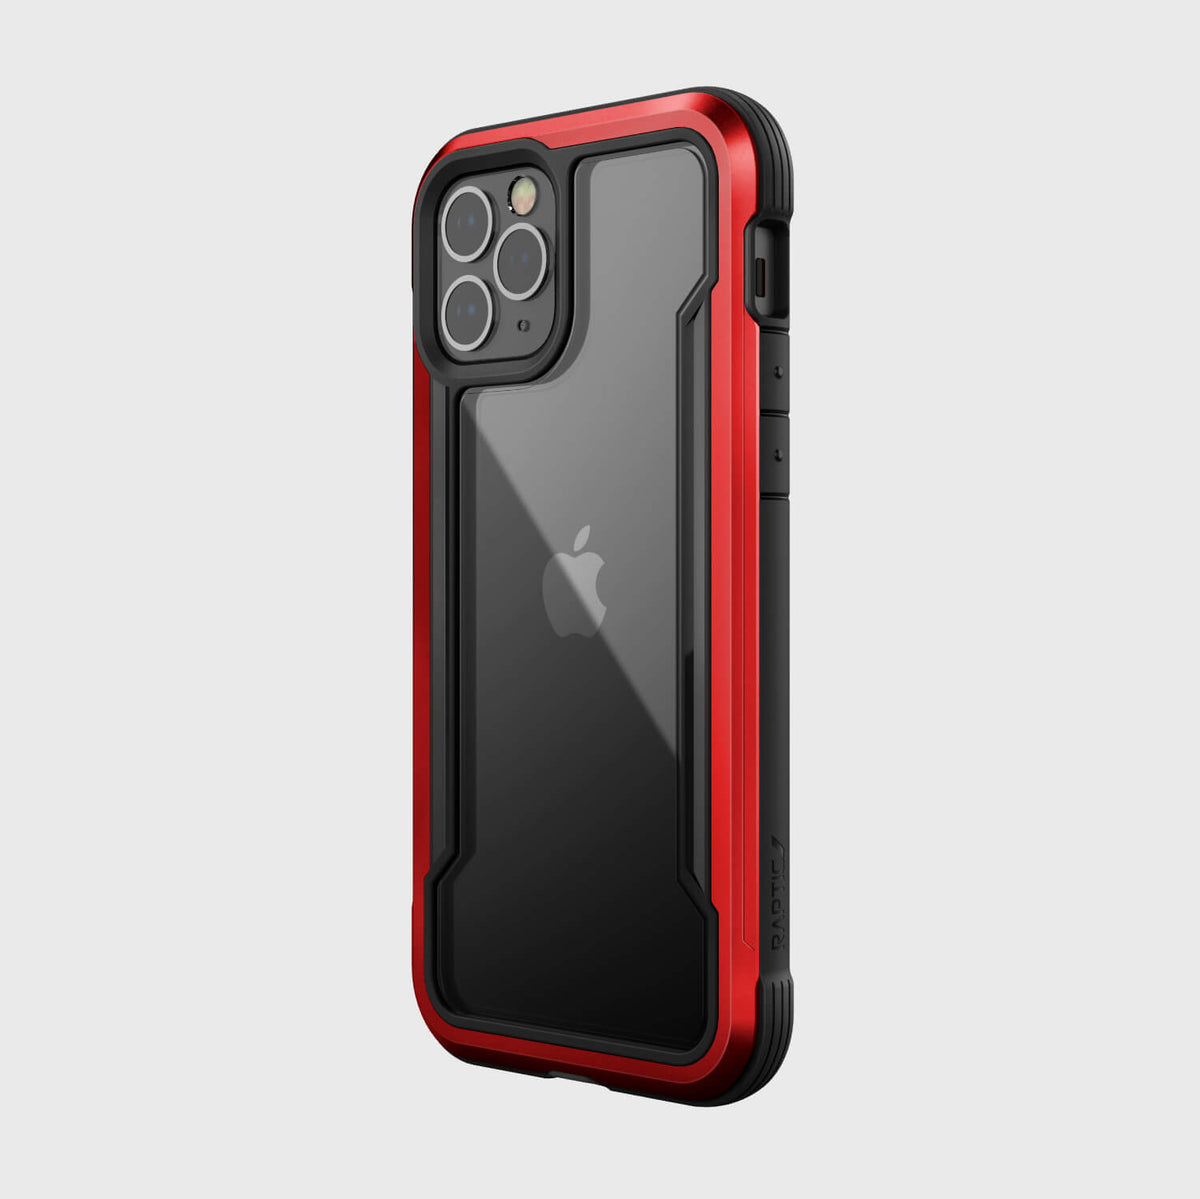 The iPhone 12 & iPhone 12 Pro case - SHIELD from Raptic offers excellent protection.